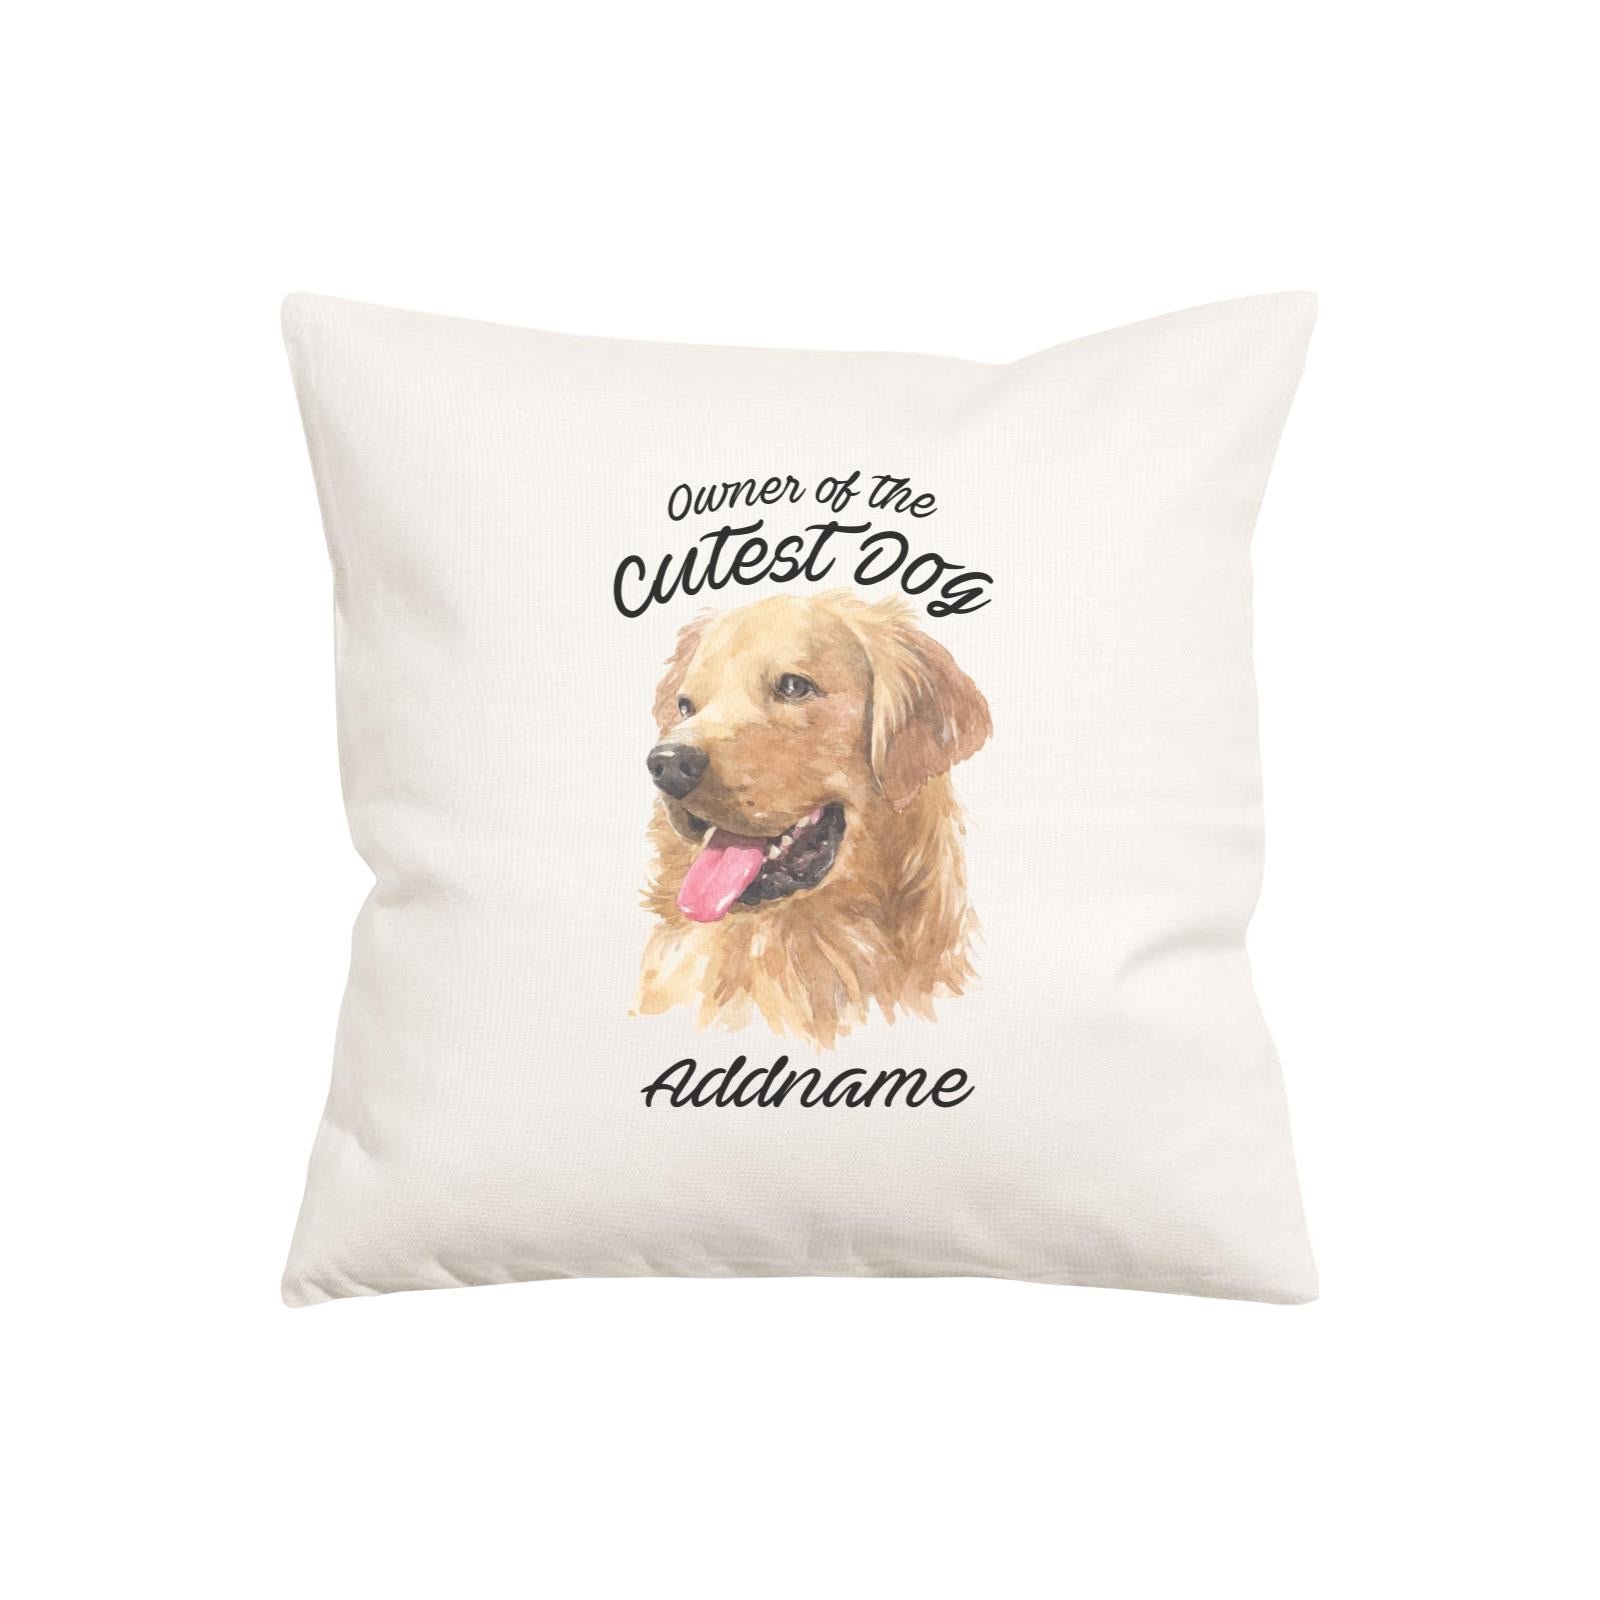 Watercolor Dog Owner Of The Cutest Dog Golden Retriever Left Addname Pillow Cushion